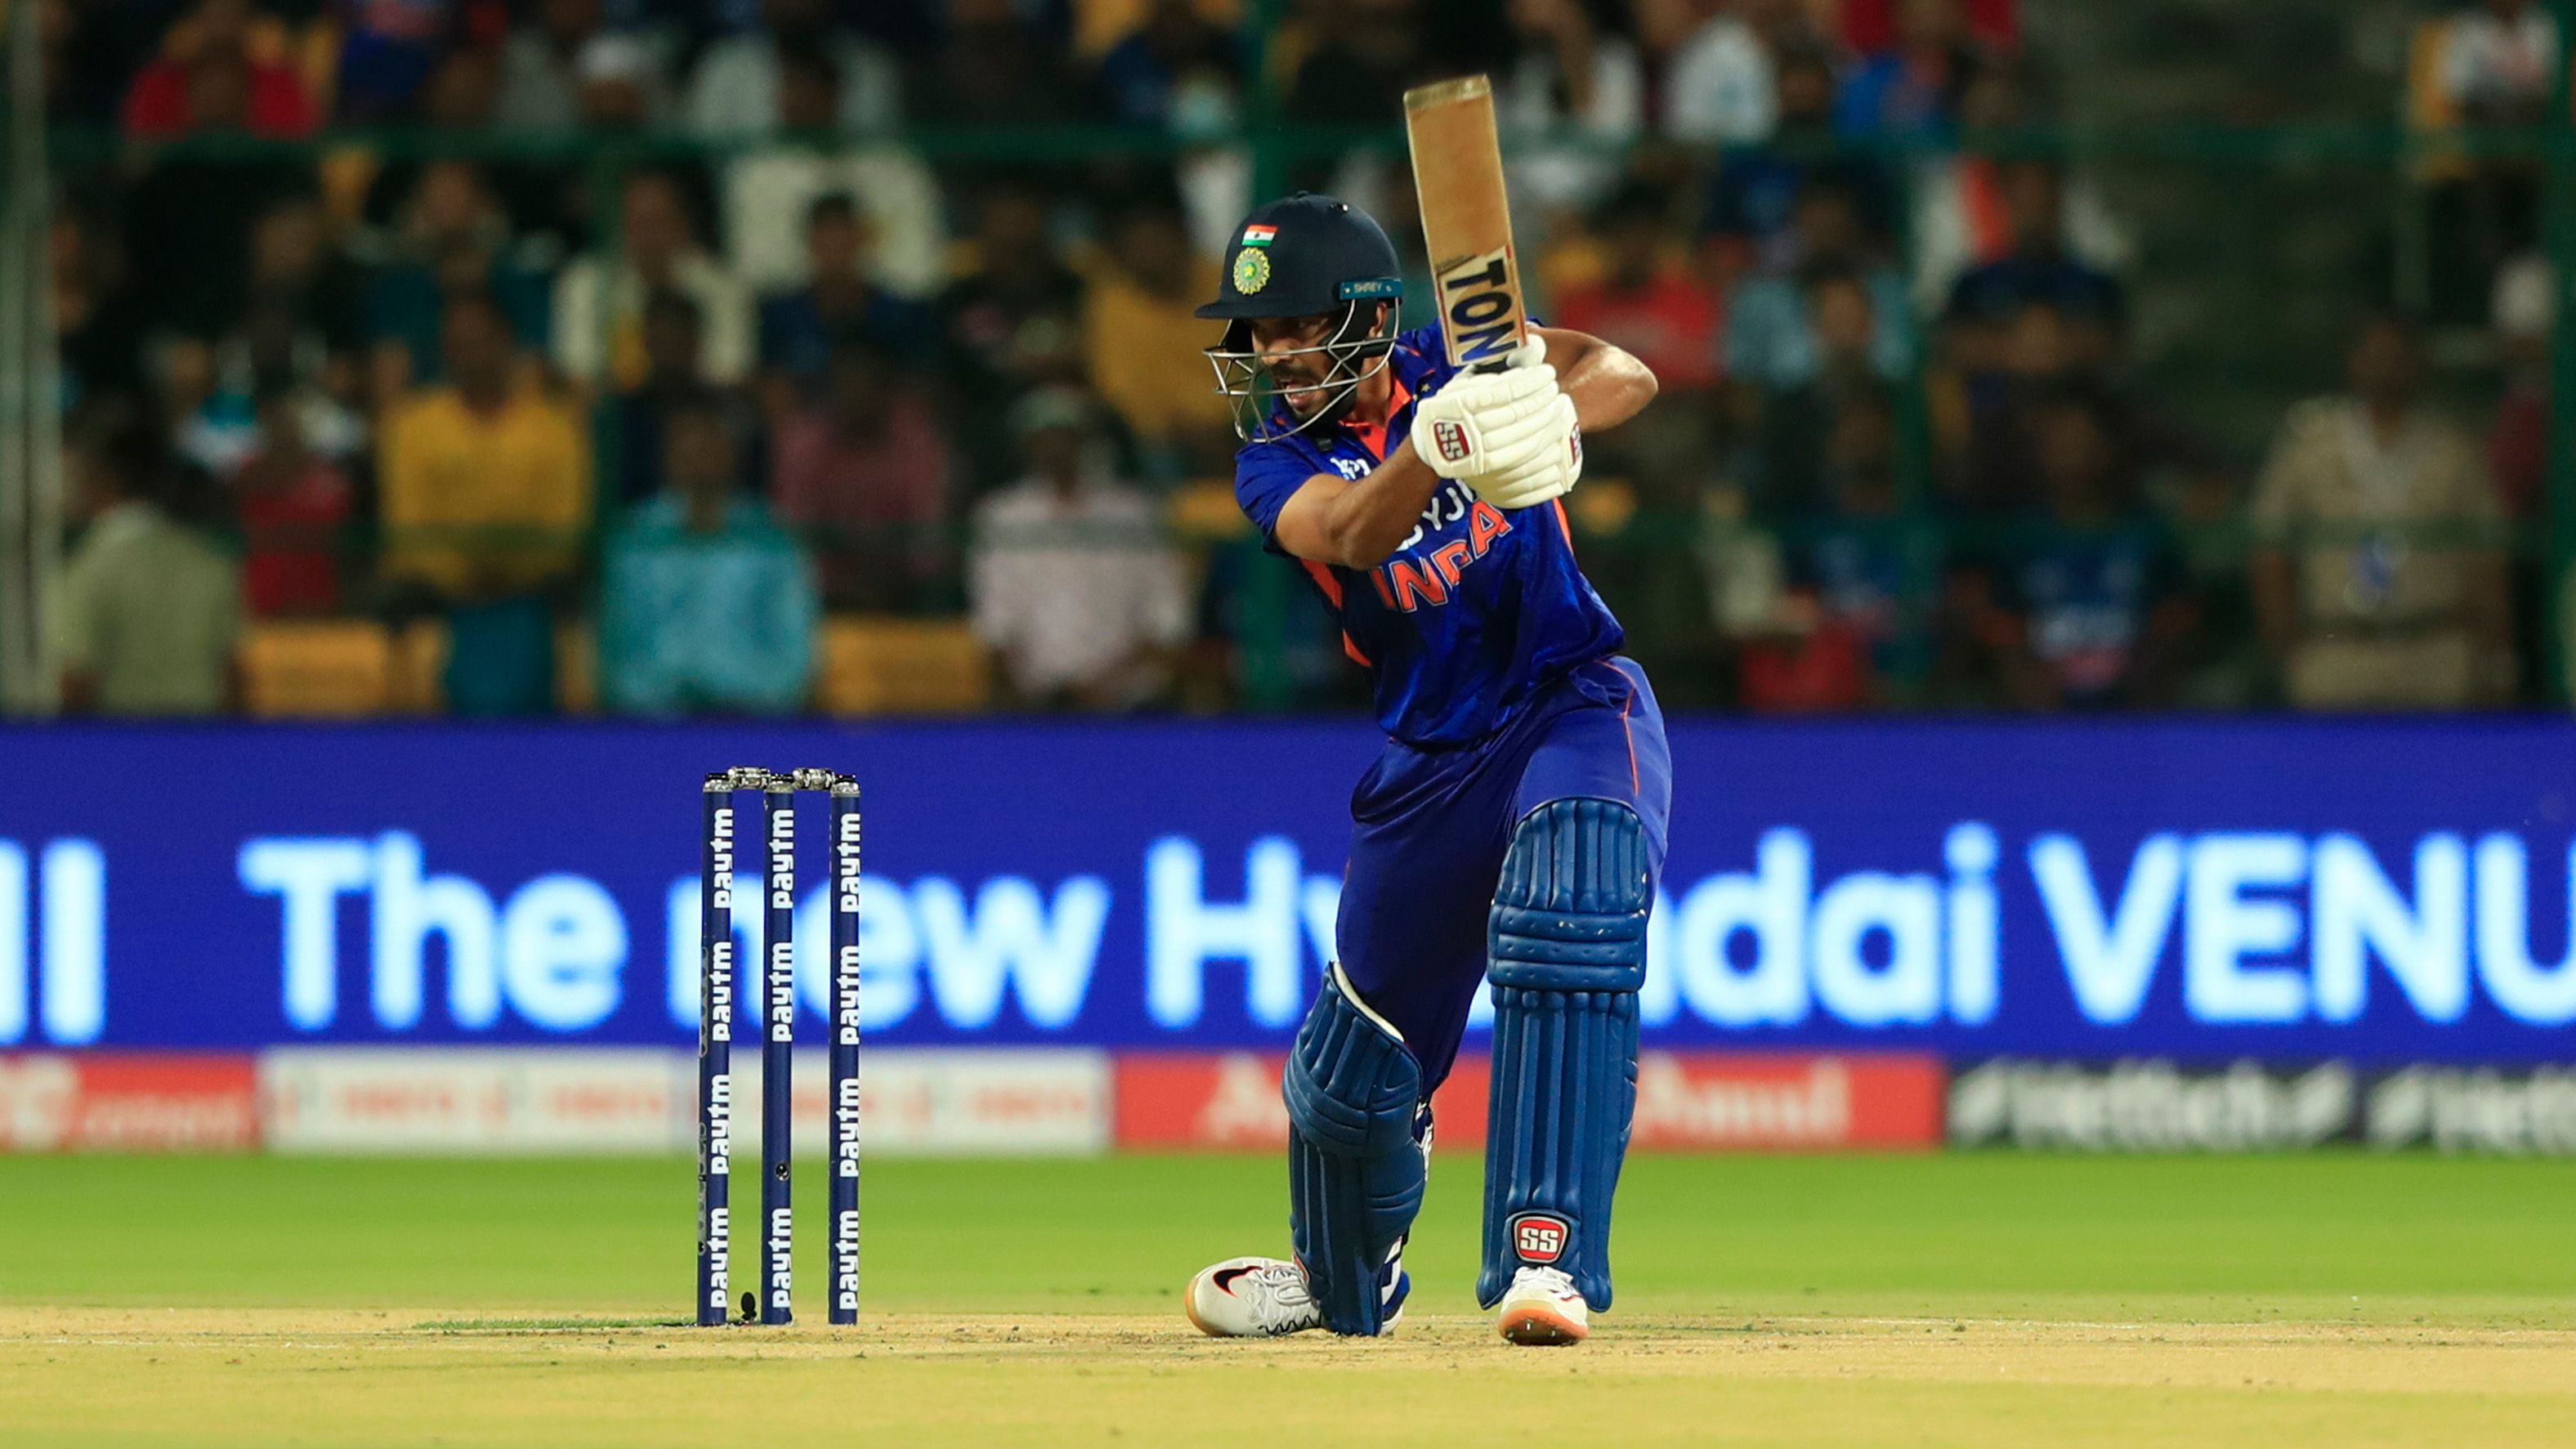 Ruturaj Gaikwad of India plays a shot during the 5th T20 International match between India and South Africa at  M. Chinnaswamy Stadium on June 19, 2022 in Bangalore, India. (Photo by Pankaj Nangia/Gallo Images/Getty Images)